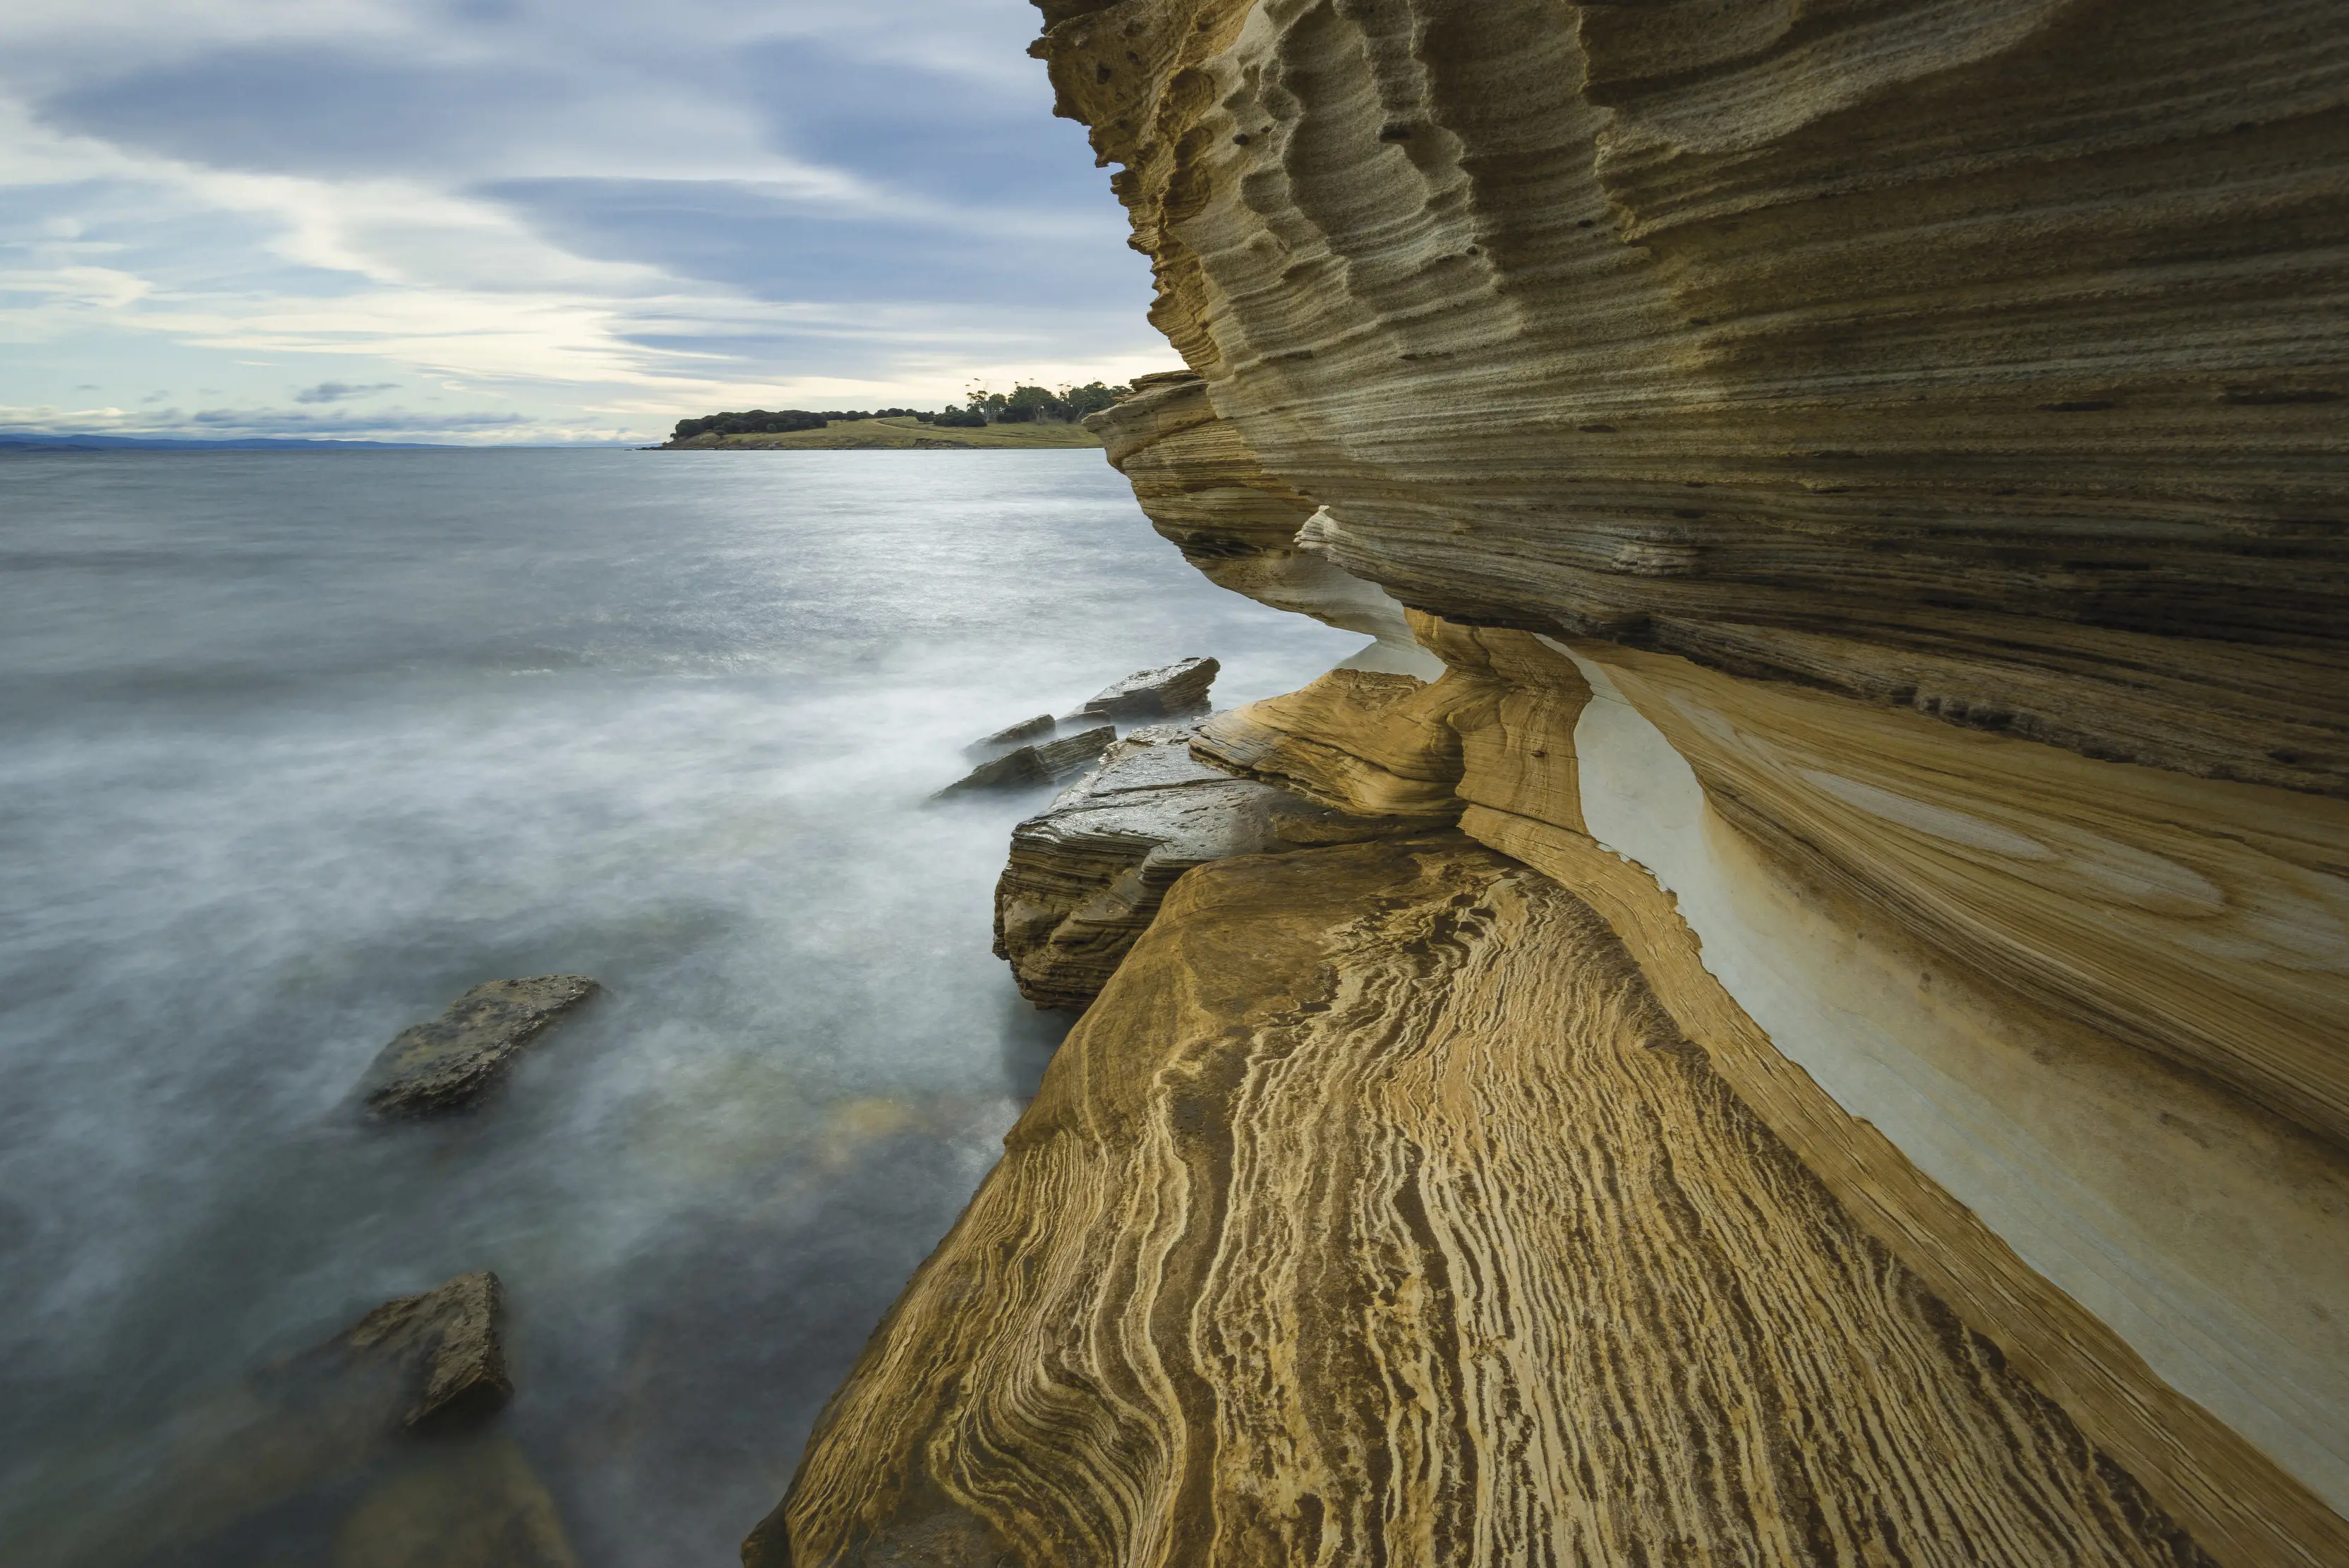 Painted Cliffs, coloured and patterned sandstone, carved and moulded by the sea at Maria Island National Park